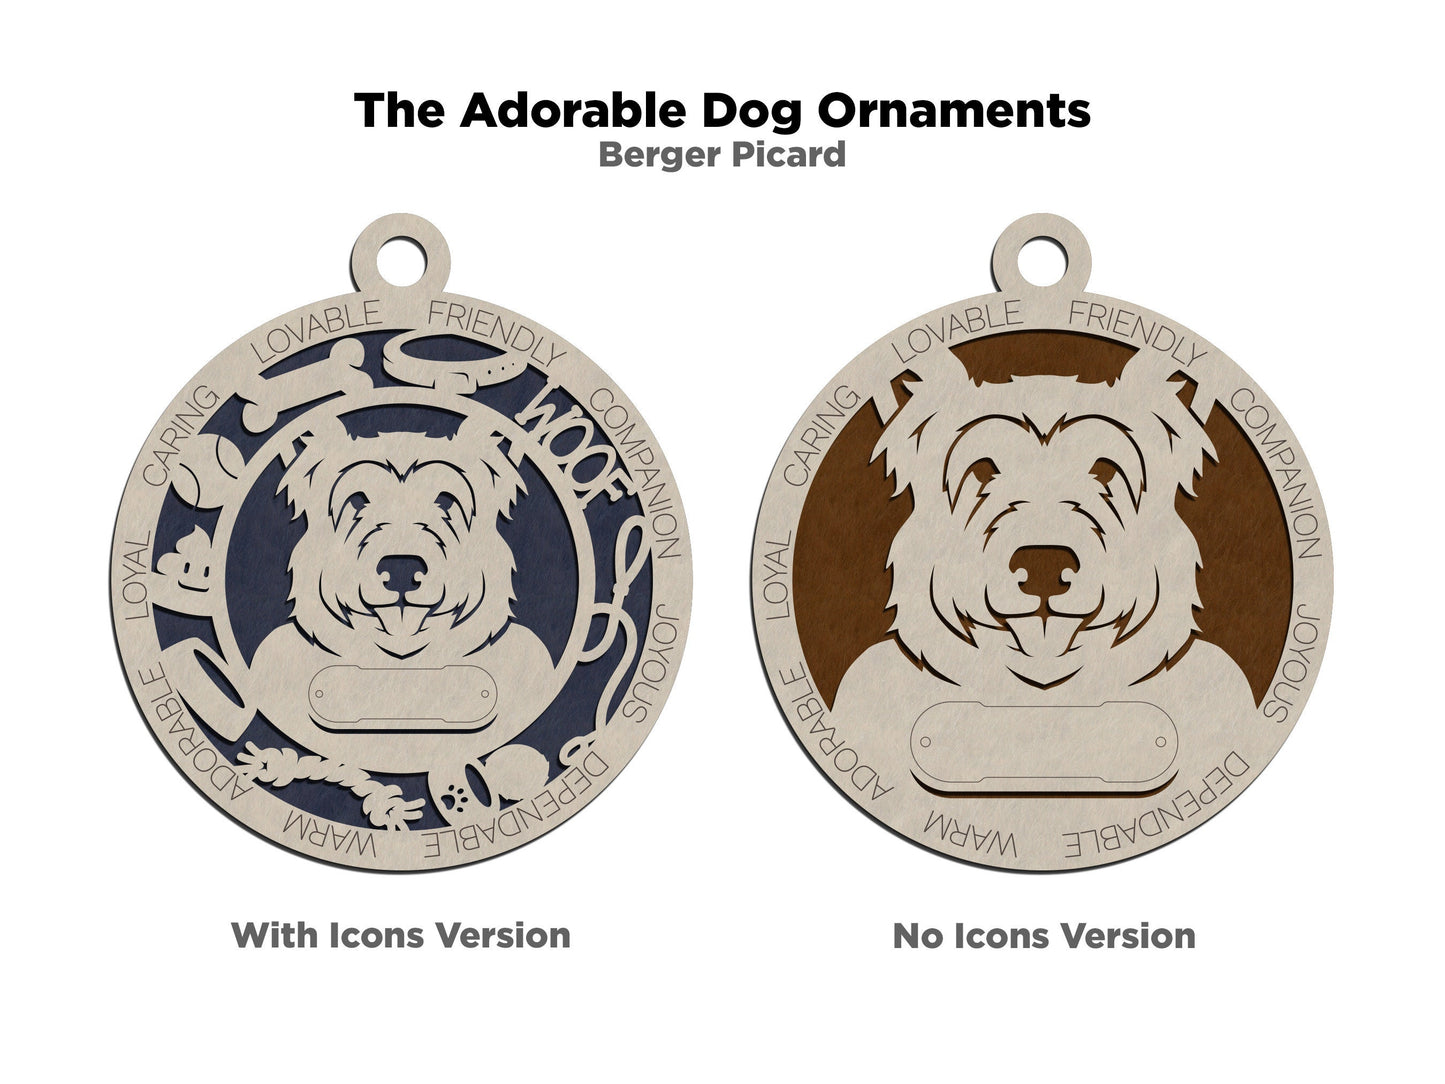 Berger Picard - Adorable Dog Ornaments - 2 Ornaments included - SVG, PDF, AI File Download - Sized for Glowforge